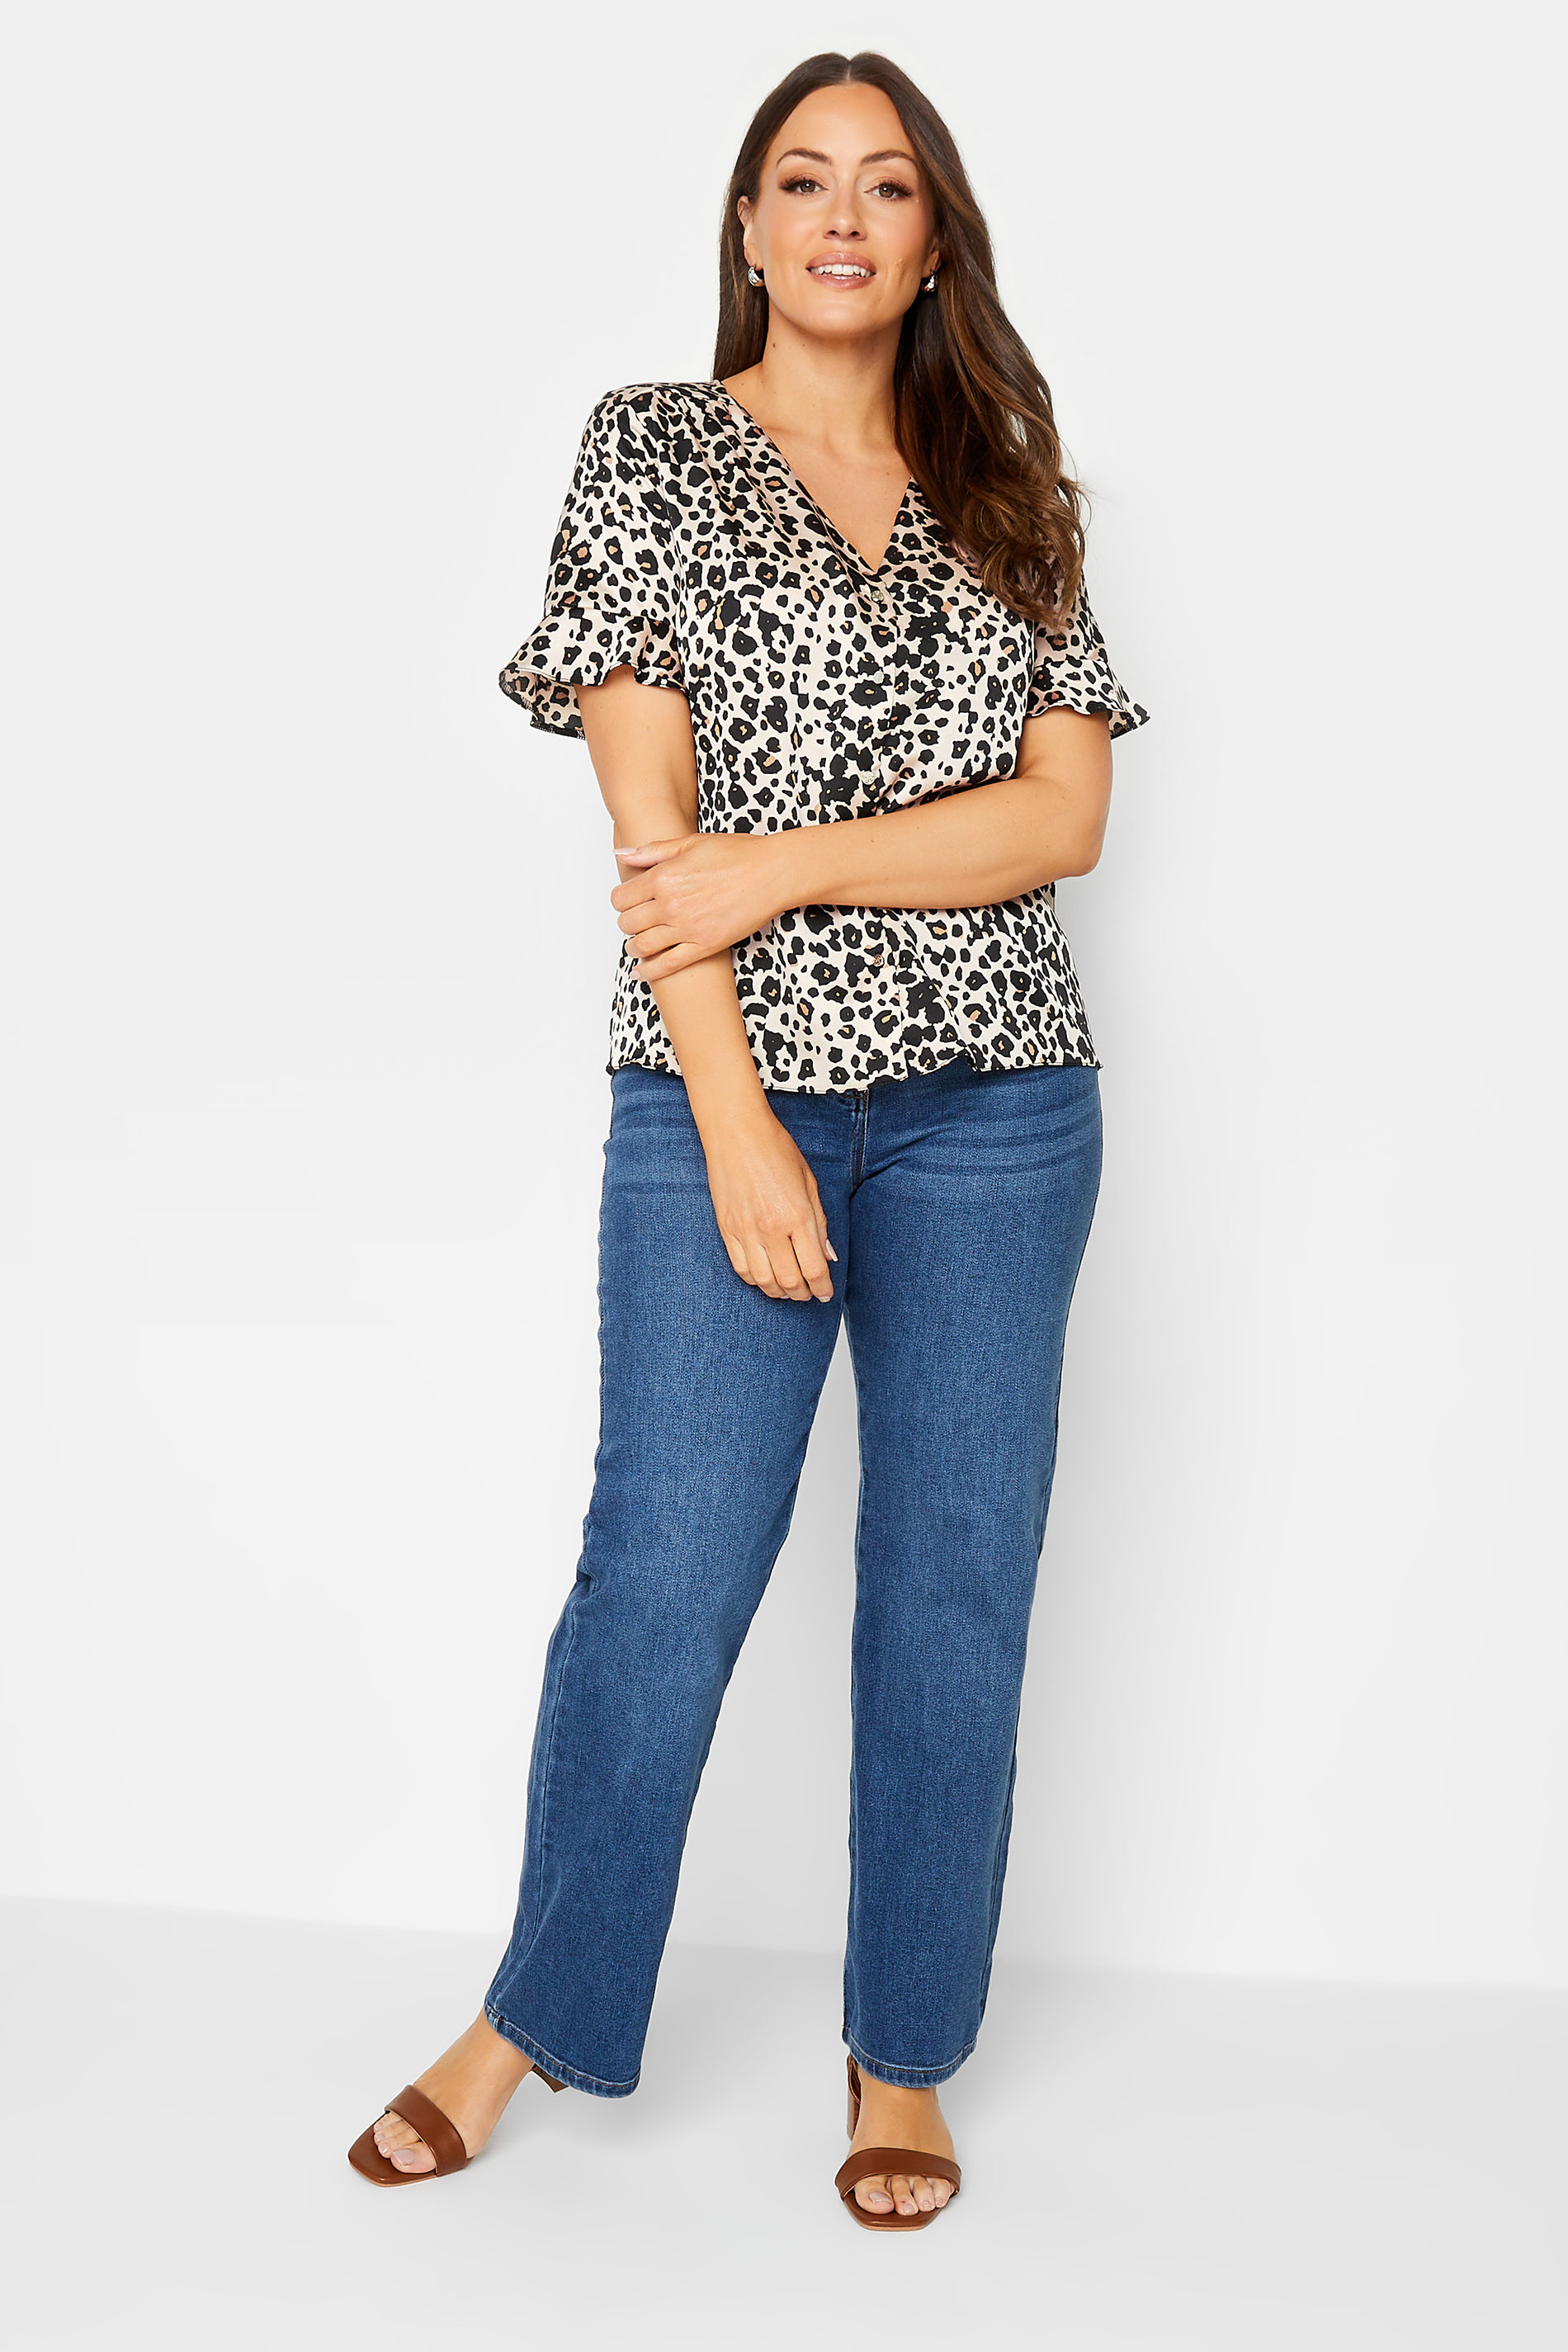 M&Co Natural Leopard Frill Sleeve Blouse | M&Co 2